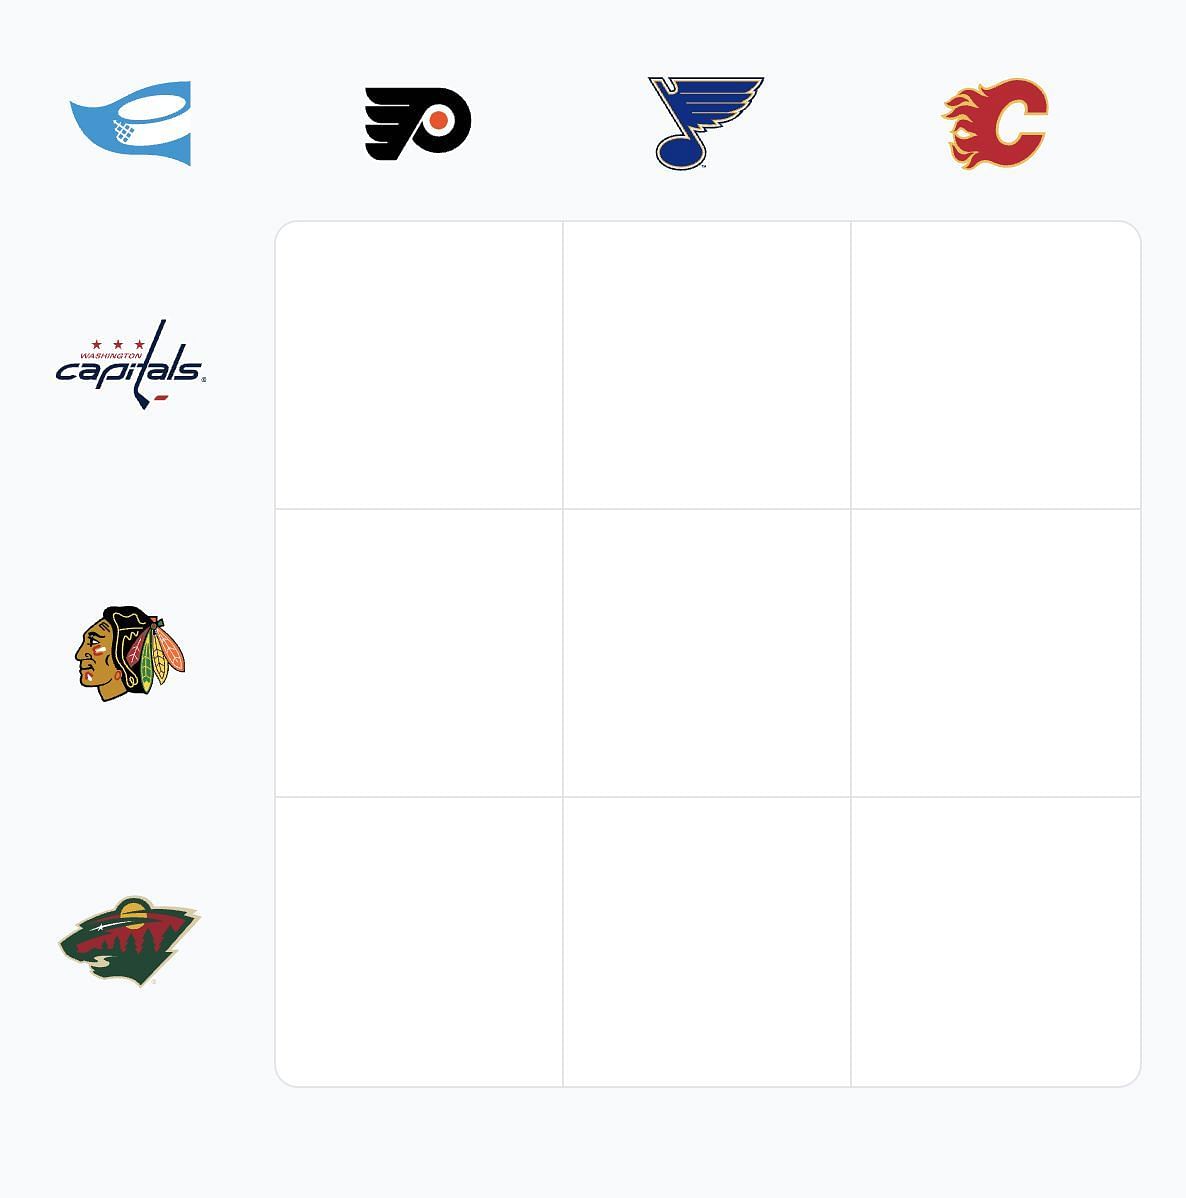 NHL Immaculate Grid answers for September 5